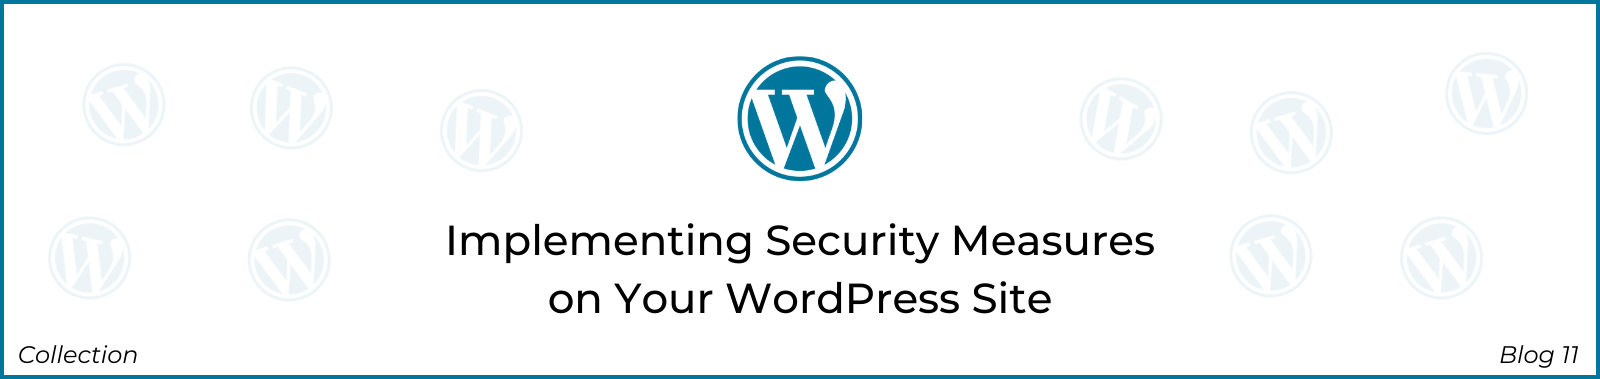 11 Wordpress Implementing Security Measures On Your Wordpress Site